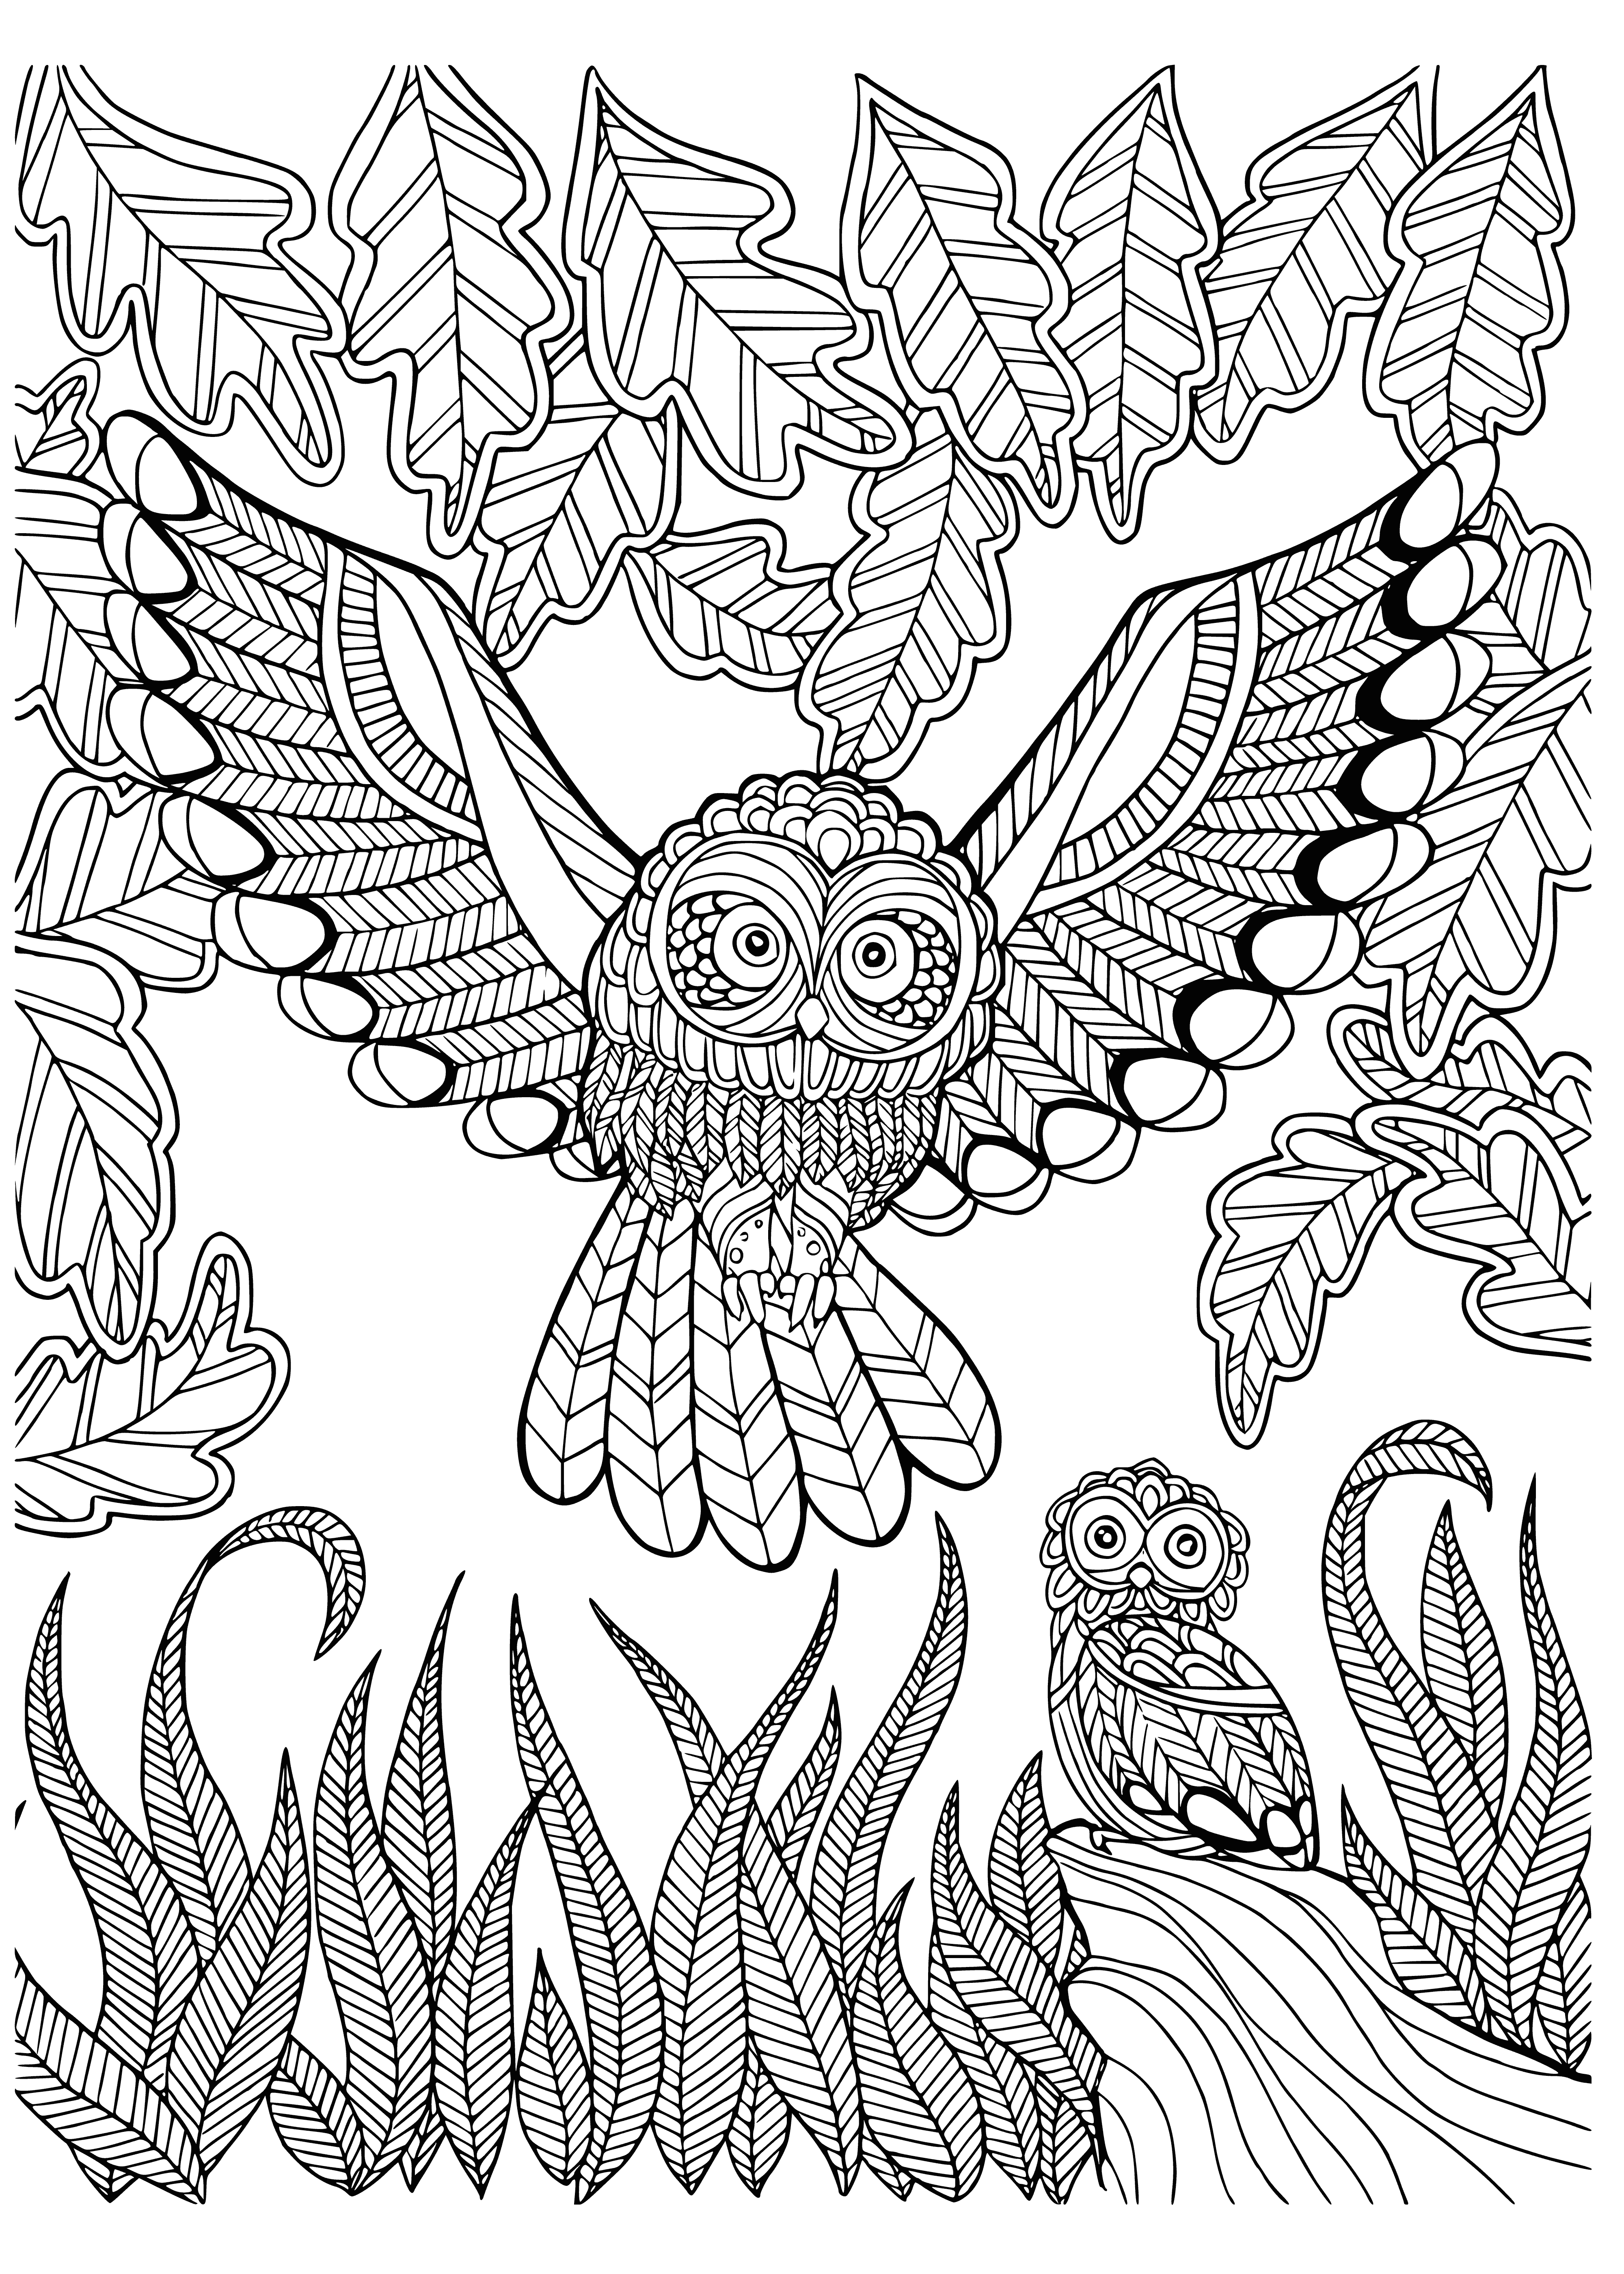 Owl and owlet in the forest coloring page